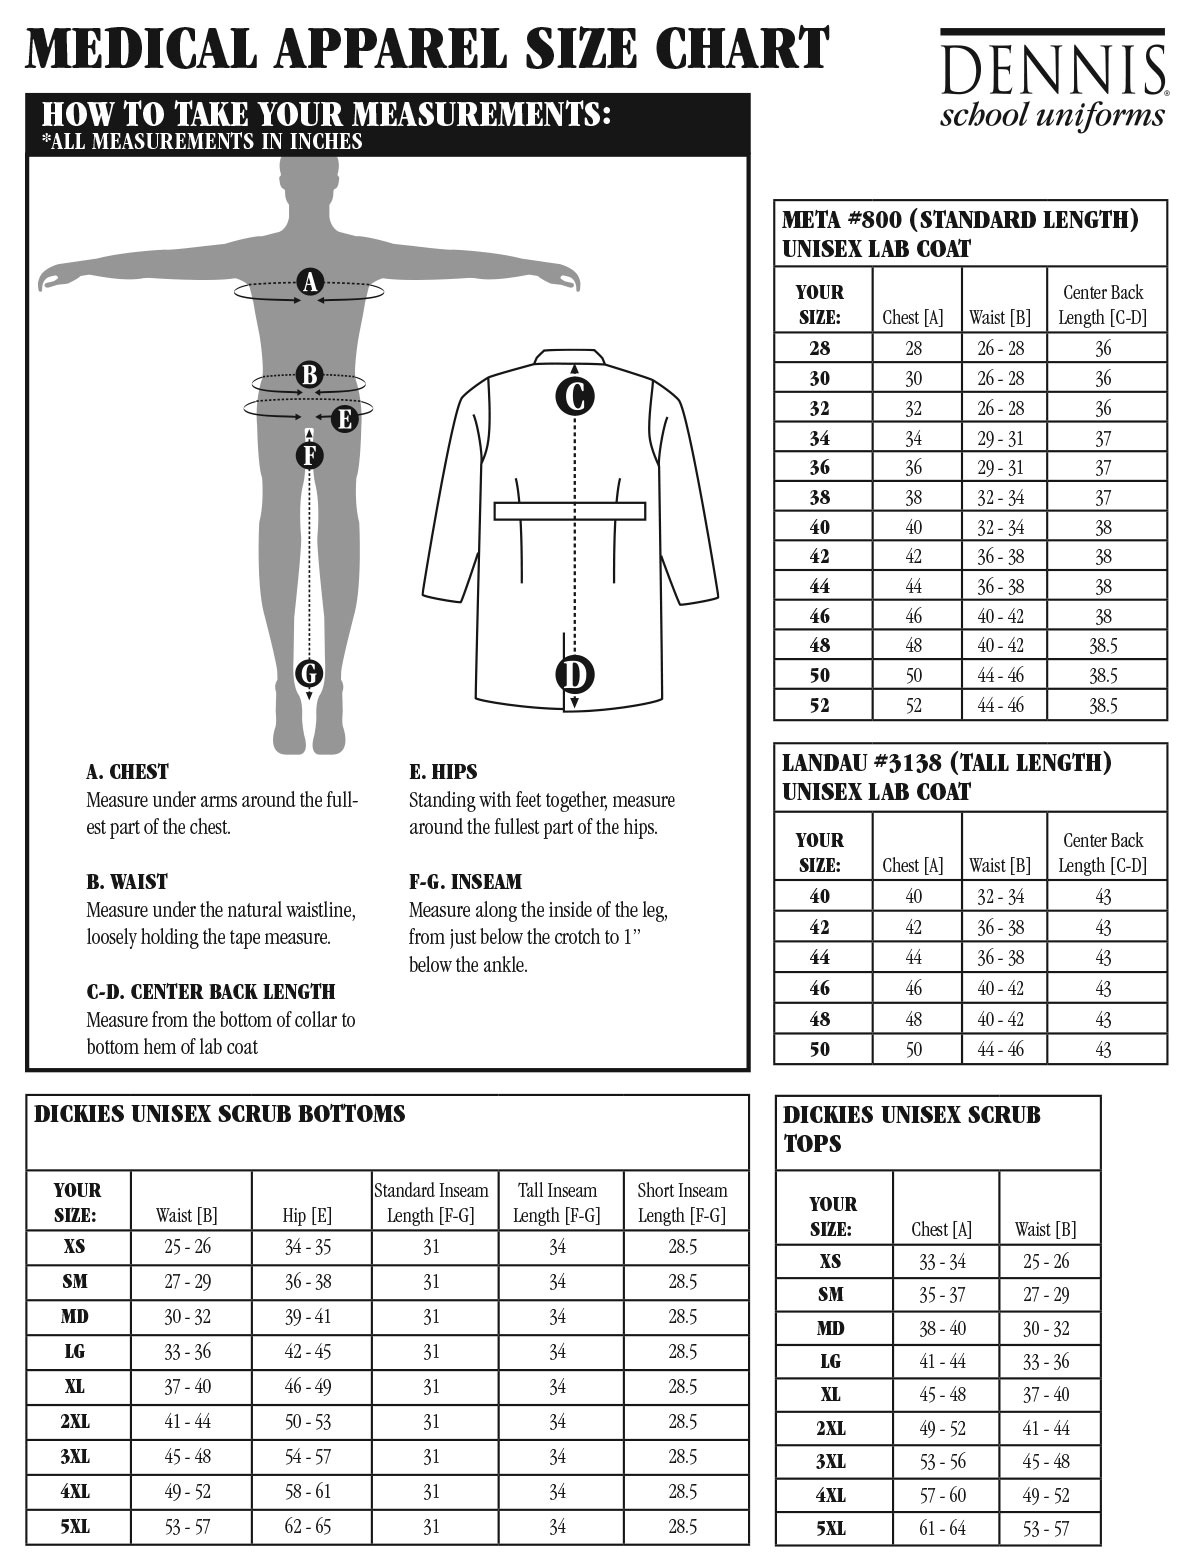 GME lab coat sizing guide